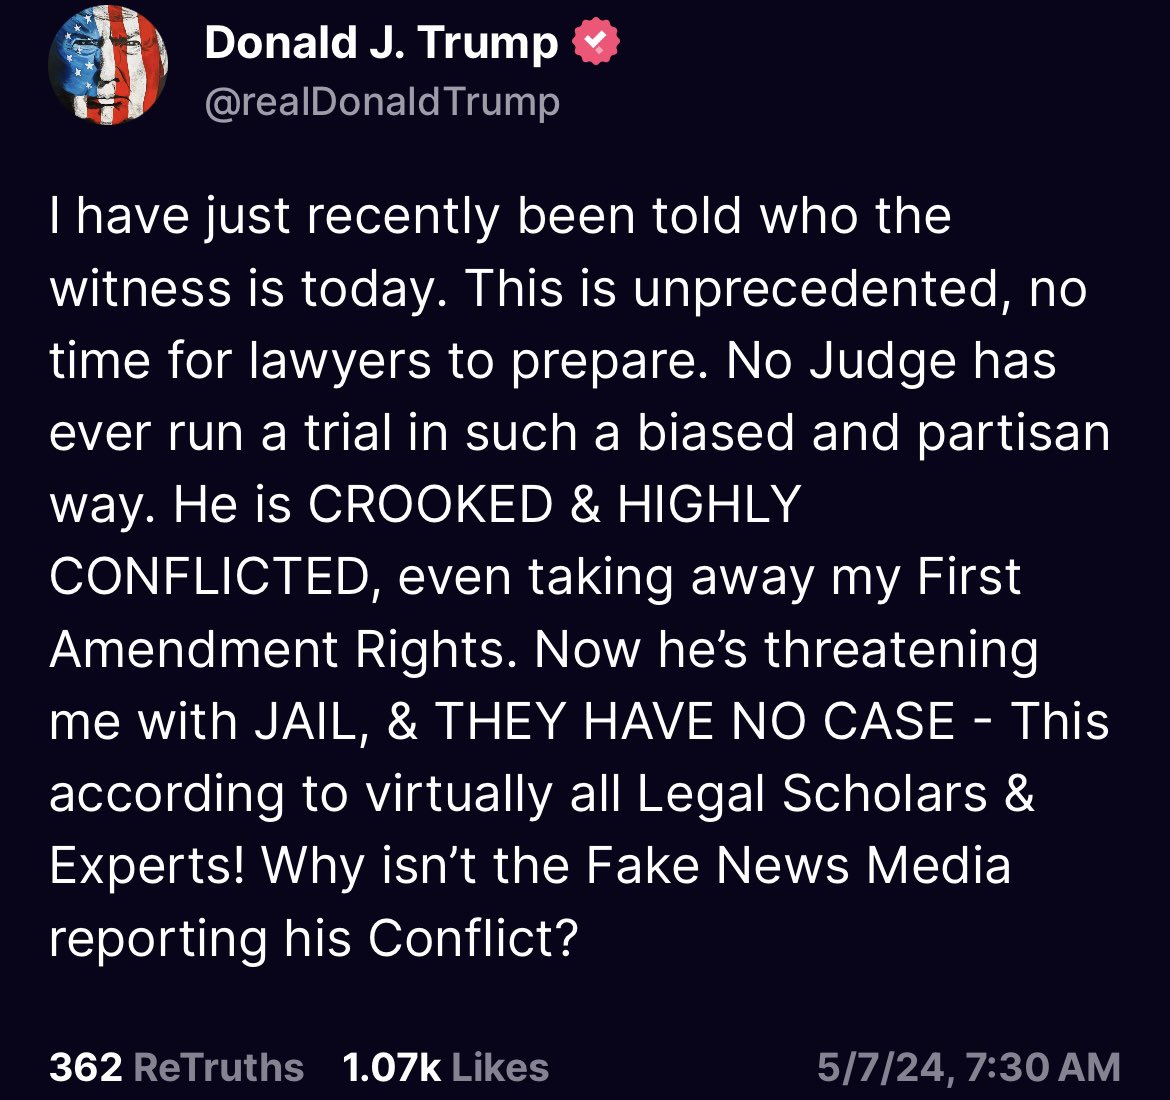 Looks like the witness today is STORMY DANIELS, and Trump has deleted this post below.